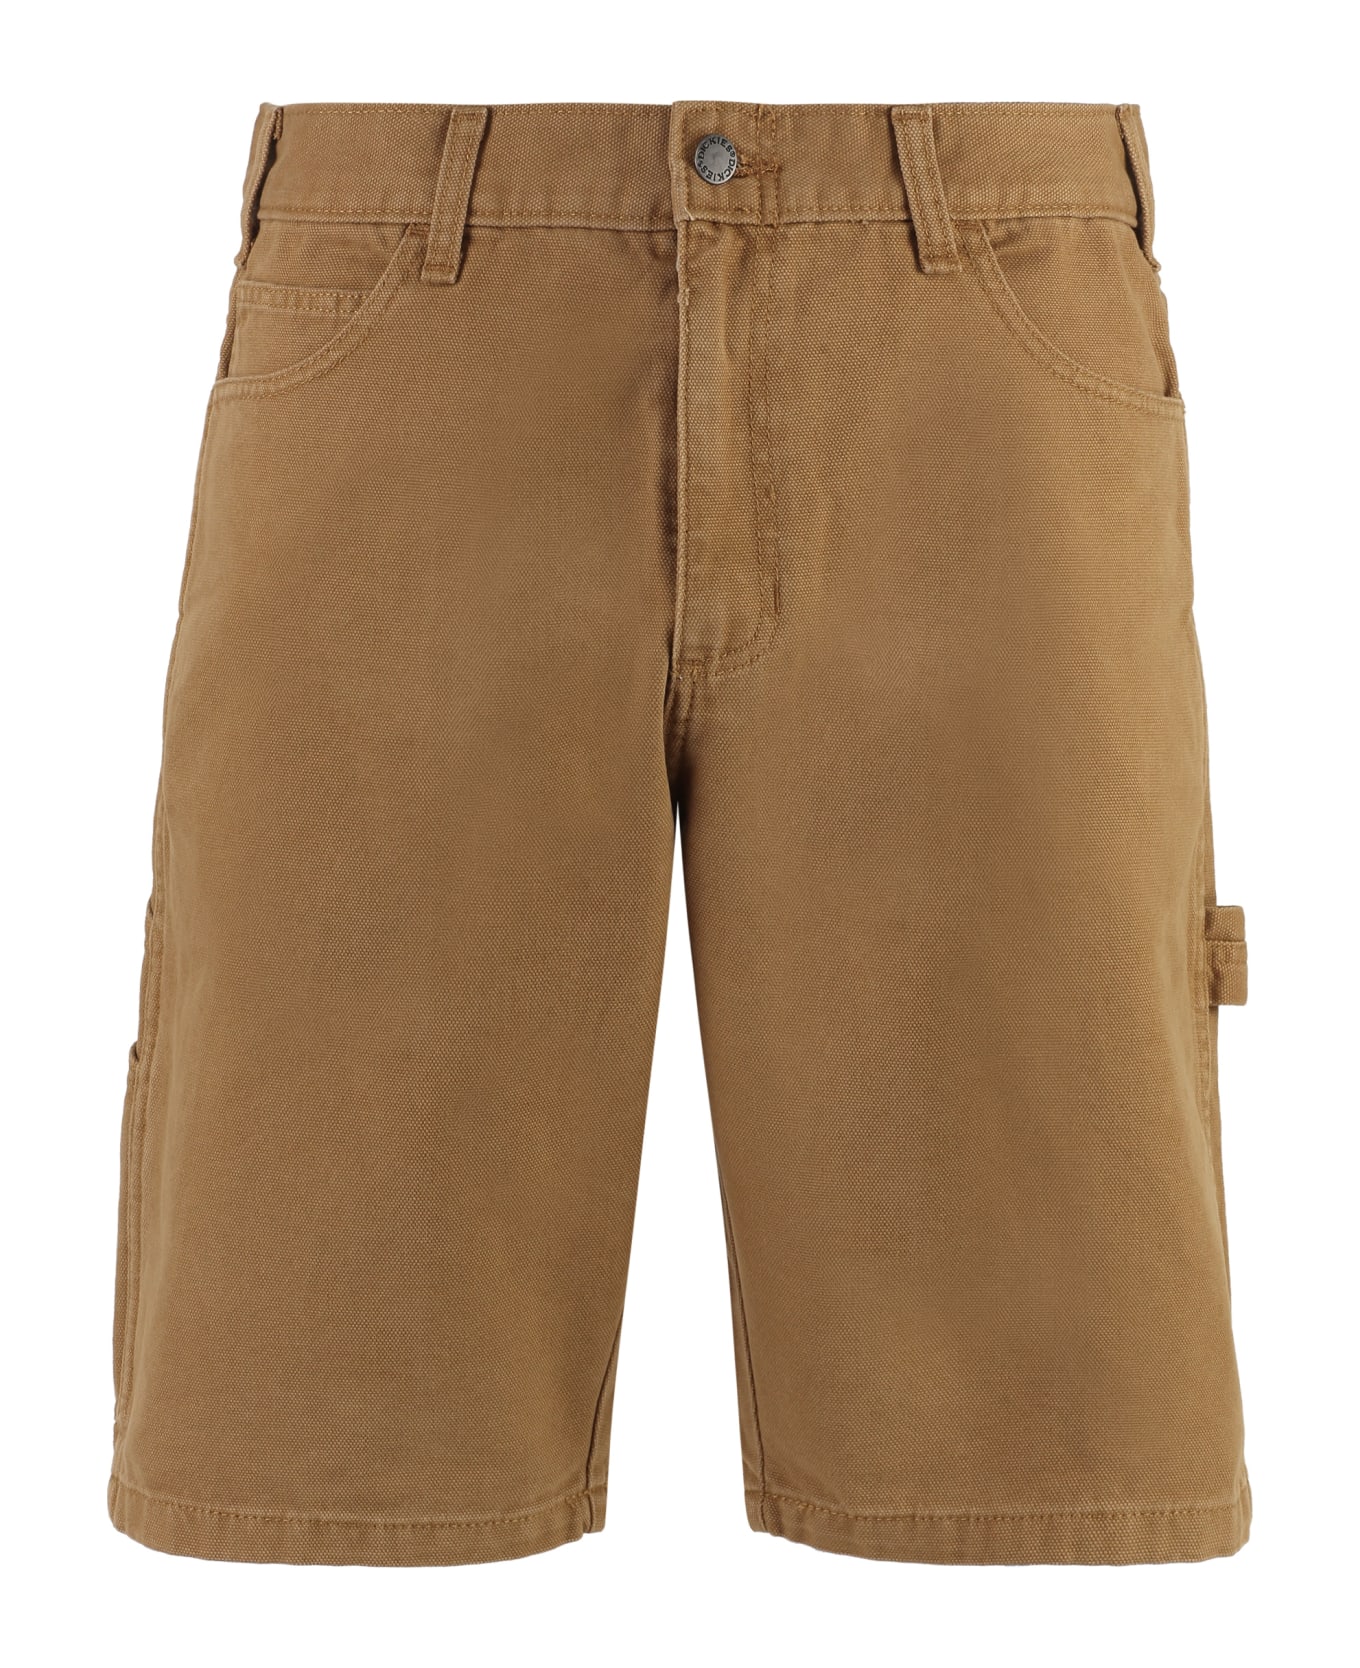 Dickies Duck Cotton Shorts - brown